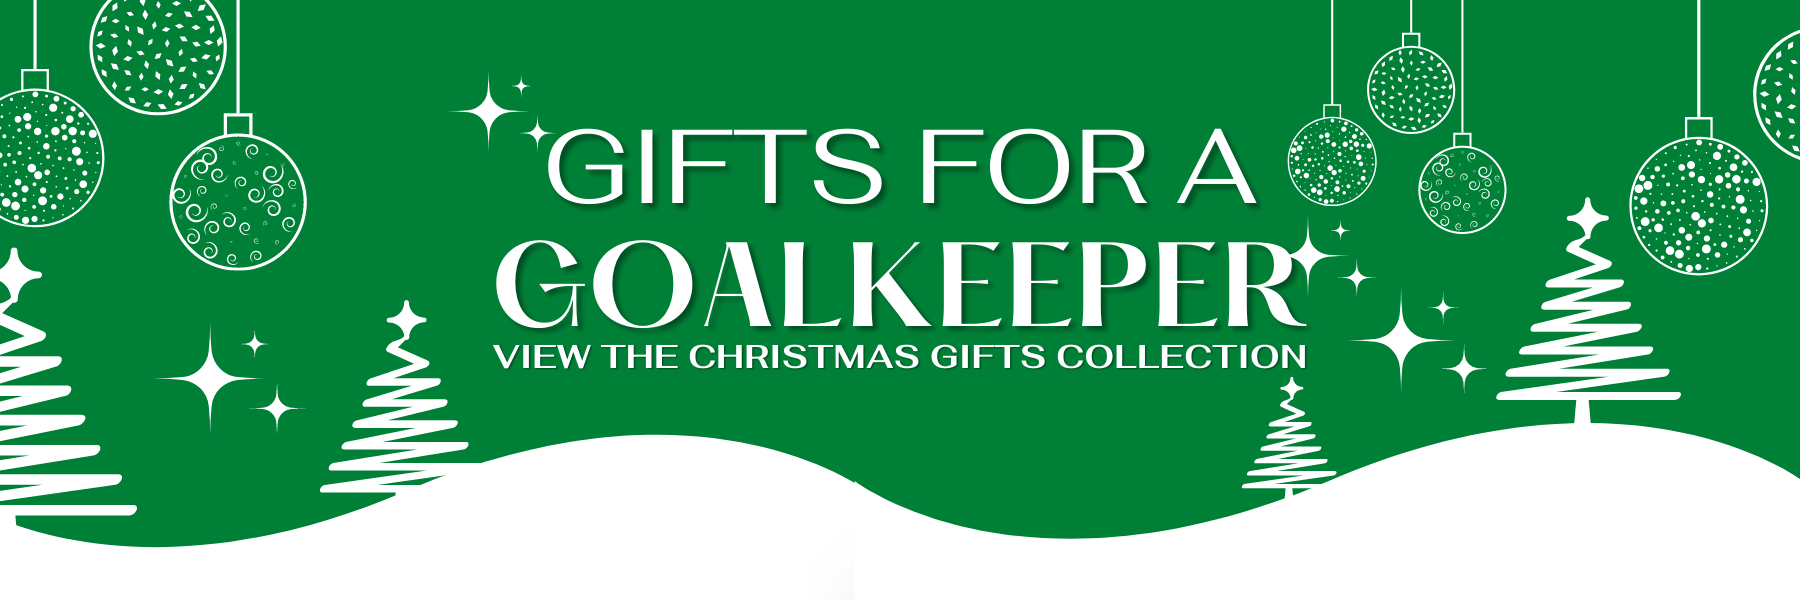 Hockey Gifts For A Keeper